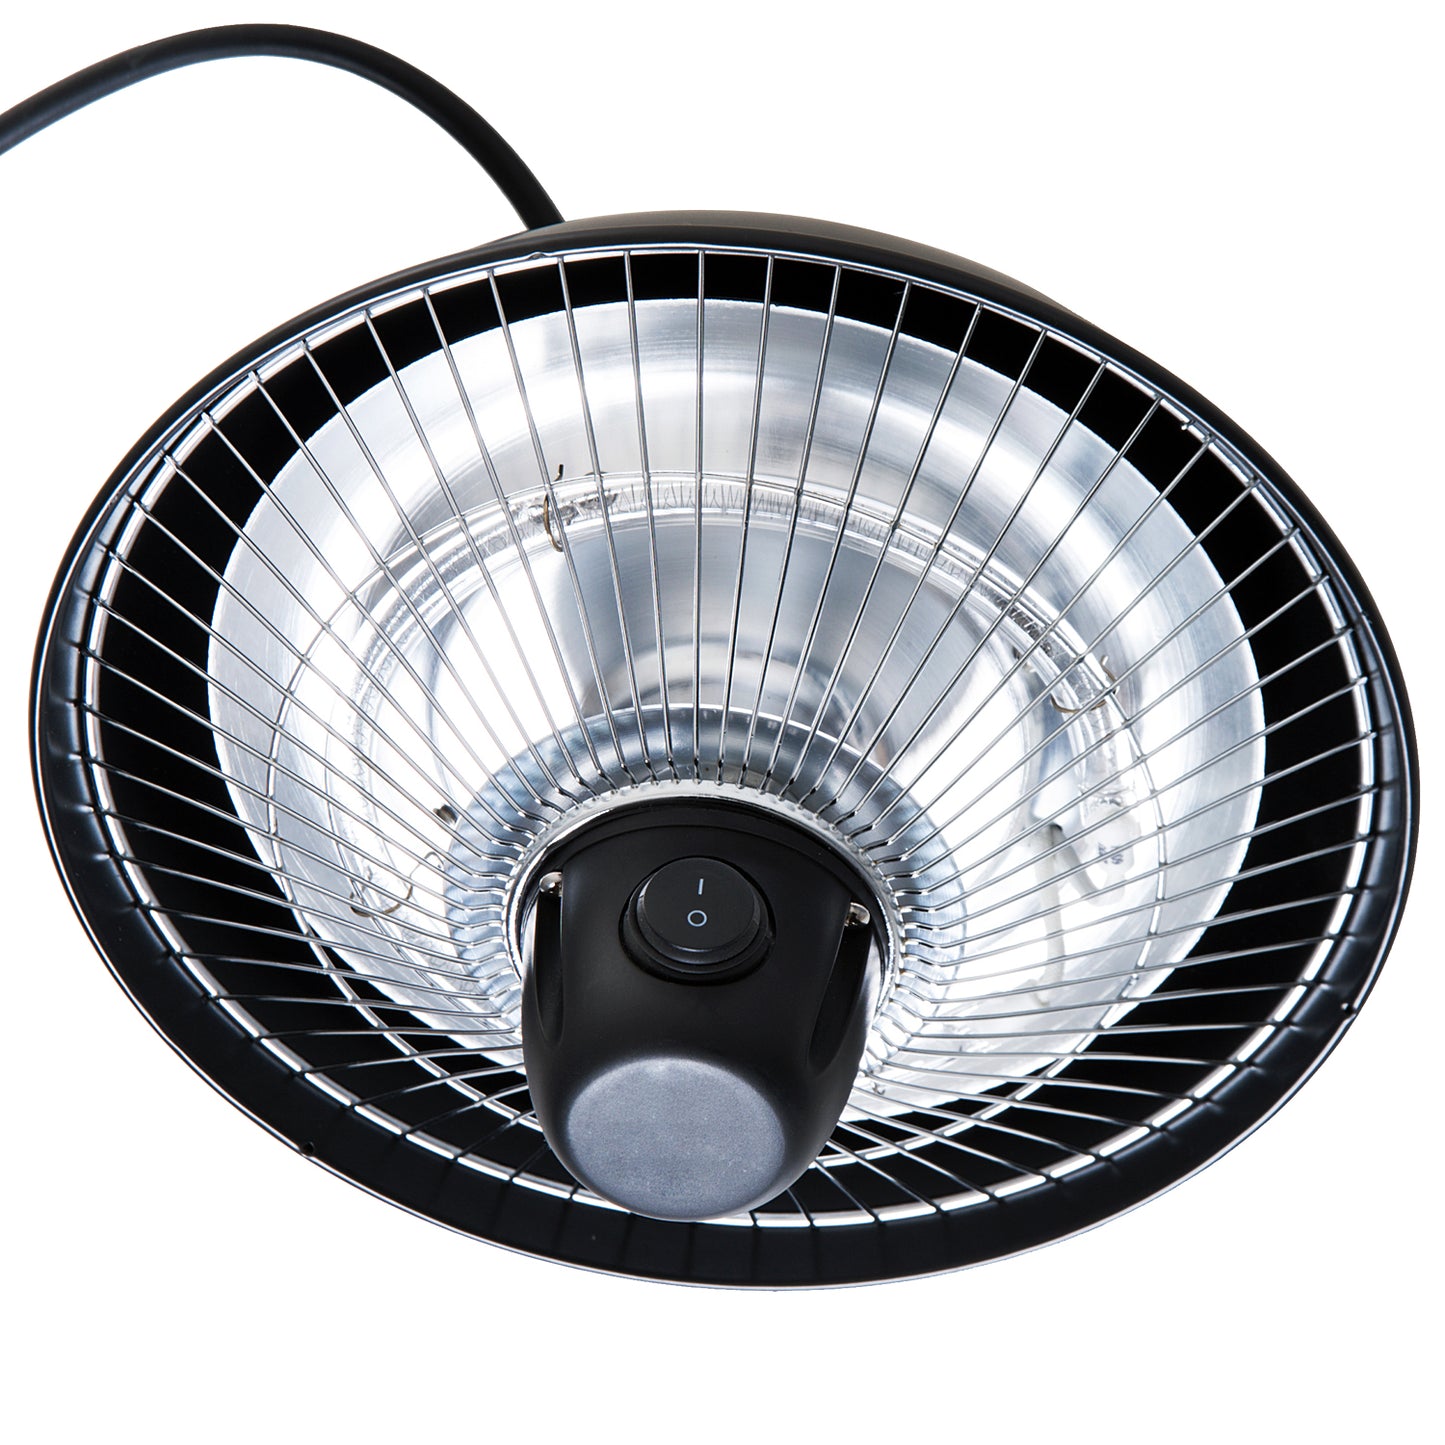 Outsunny Patio Ceiling  Electric Heater, 600W-Black